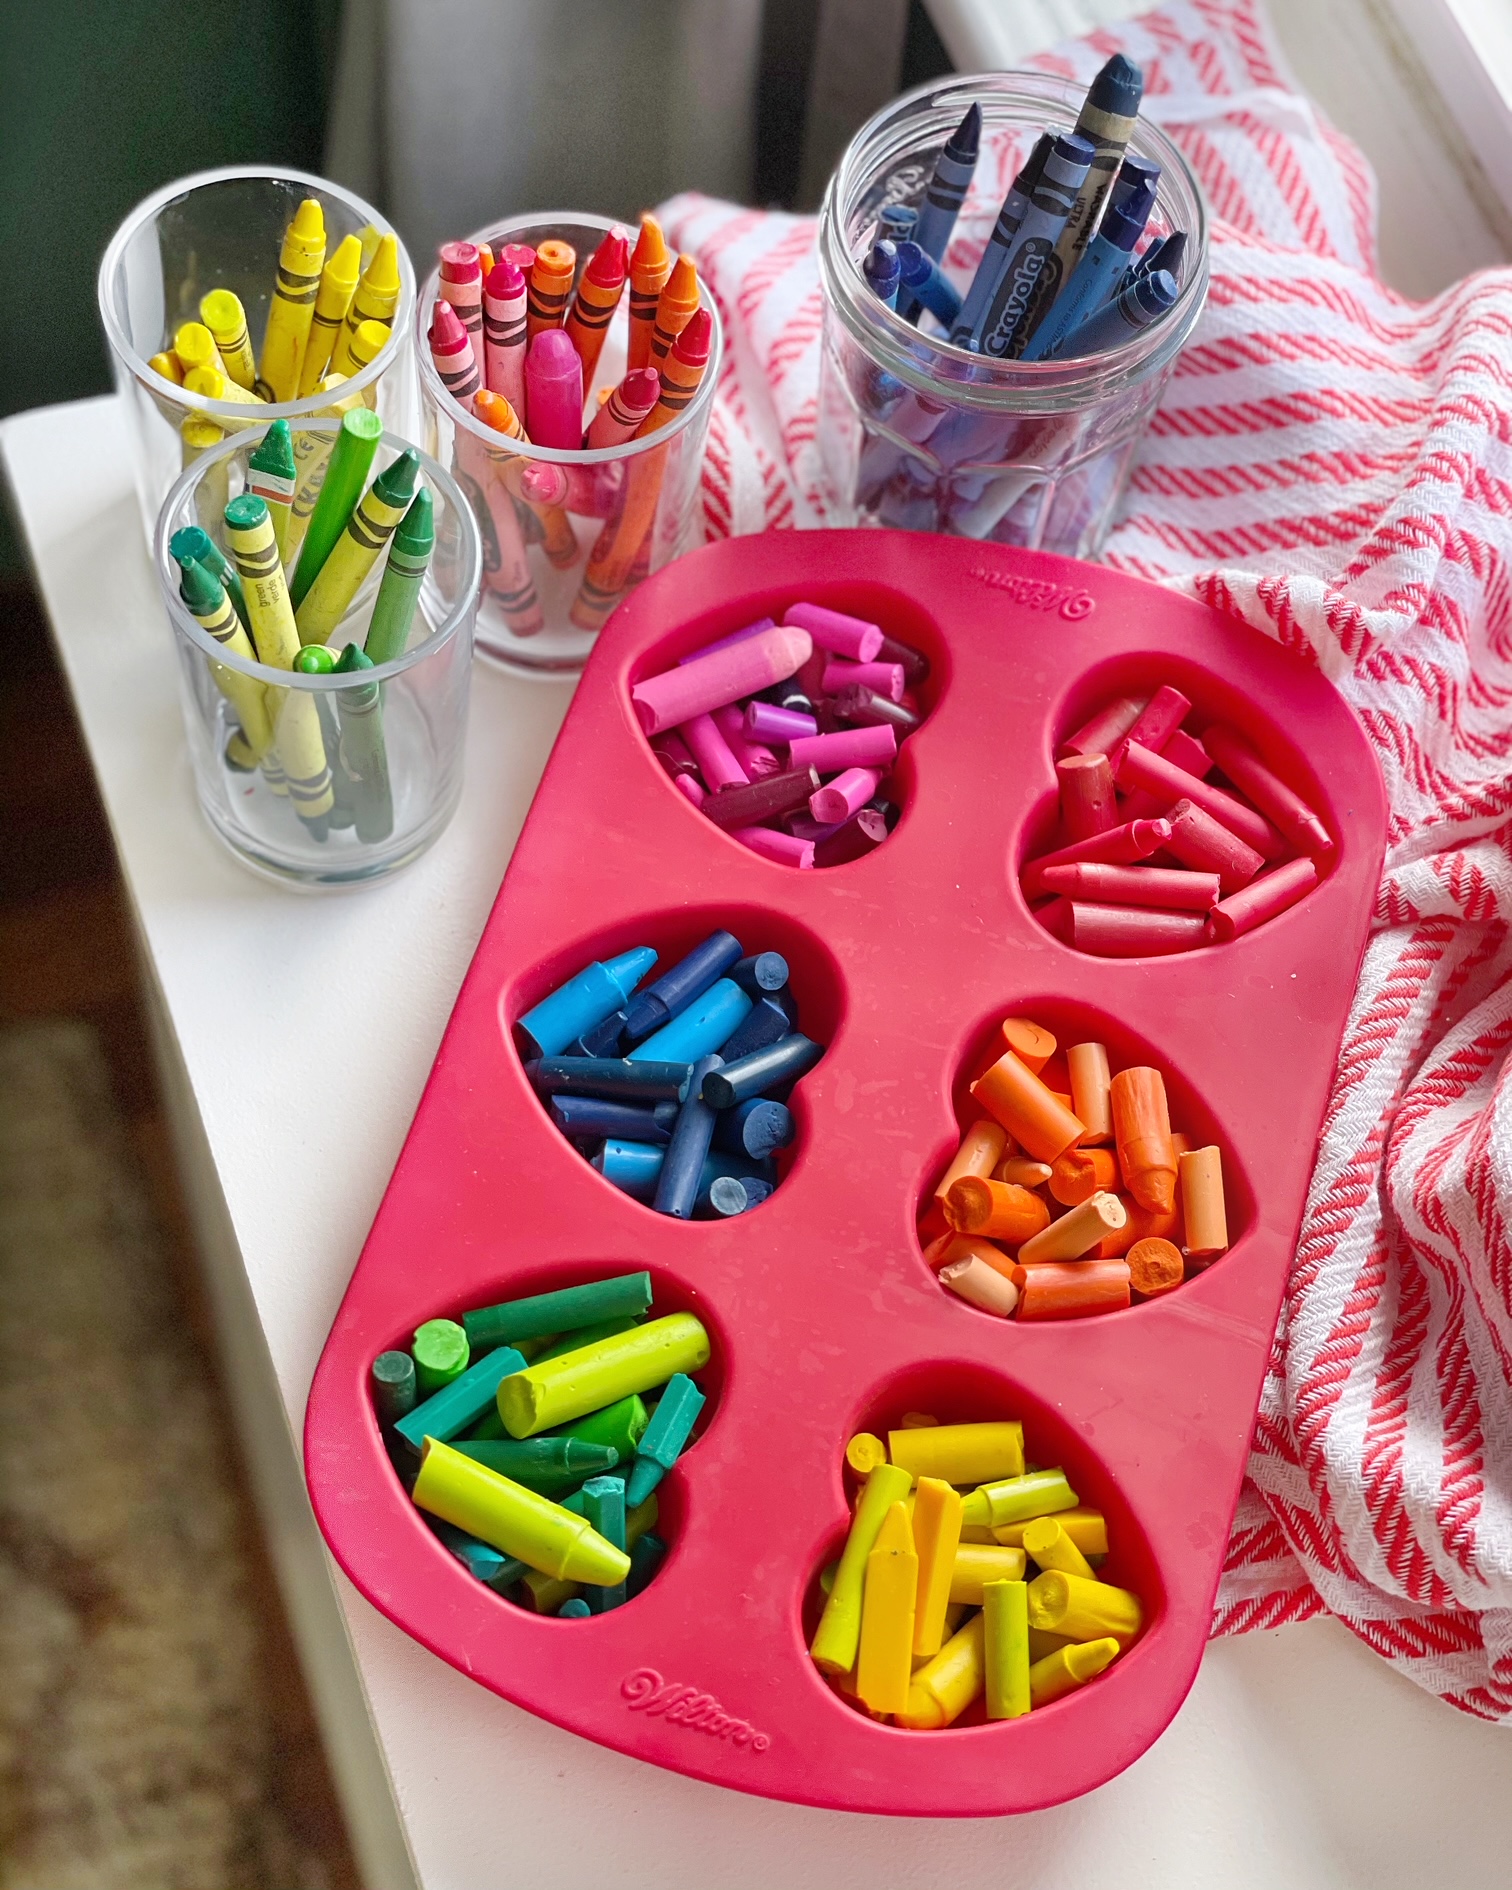 How To Make Shaped Crayons - The Big Crayons Melting Guide